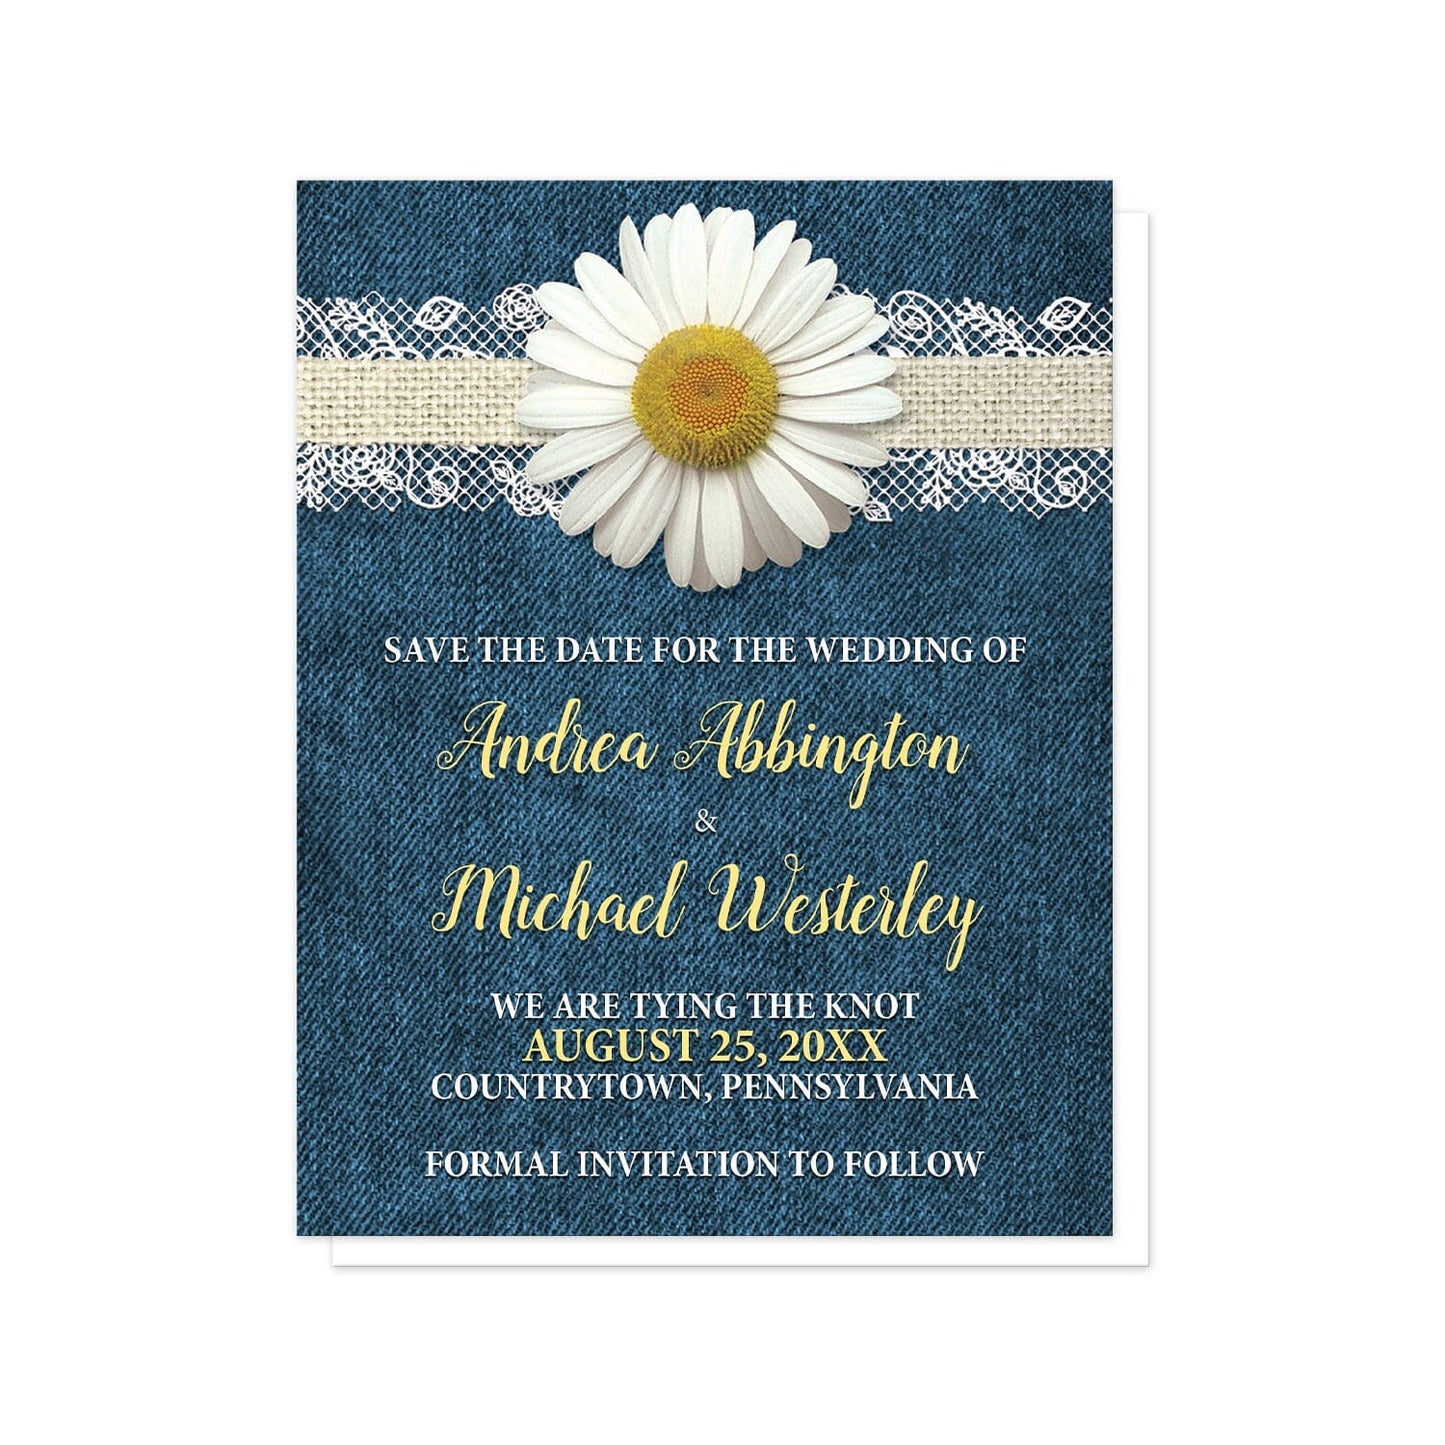 Daisy Burlap and Lace Denim Save the Date Cards at Artistically Invited. Southern rustic daisy burlap and lace denim save the date cards with a white daisy flower centered at the top on a burlap and lace ribbon strip illustration, over a country blue denim background. Your personalized wedding date details are custom printed in yellow and white over the denim design. 